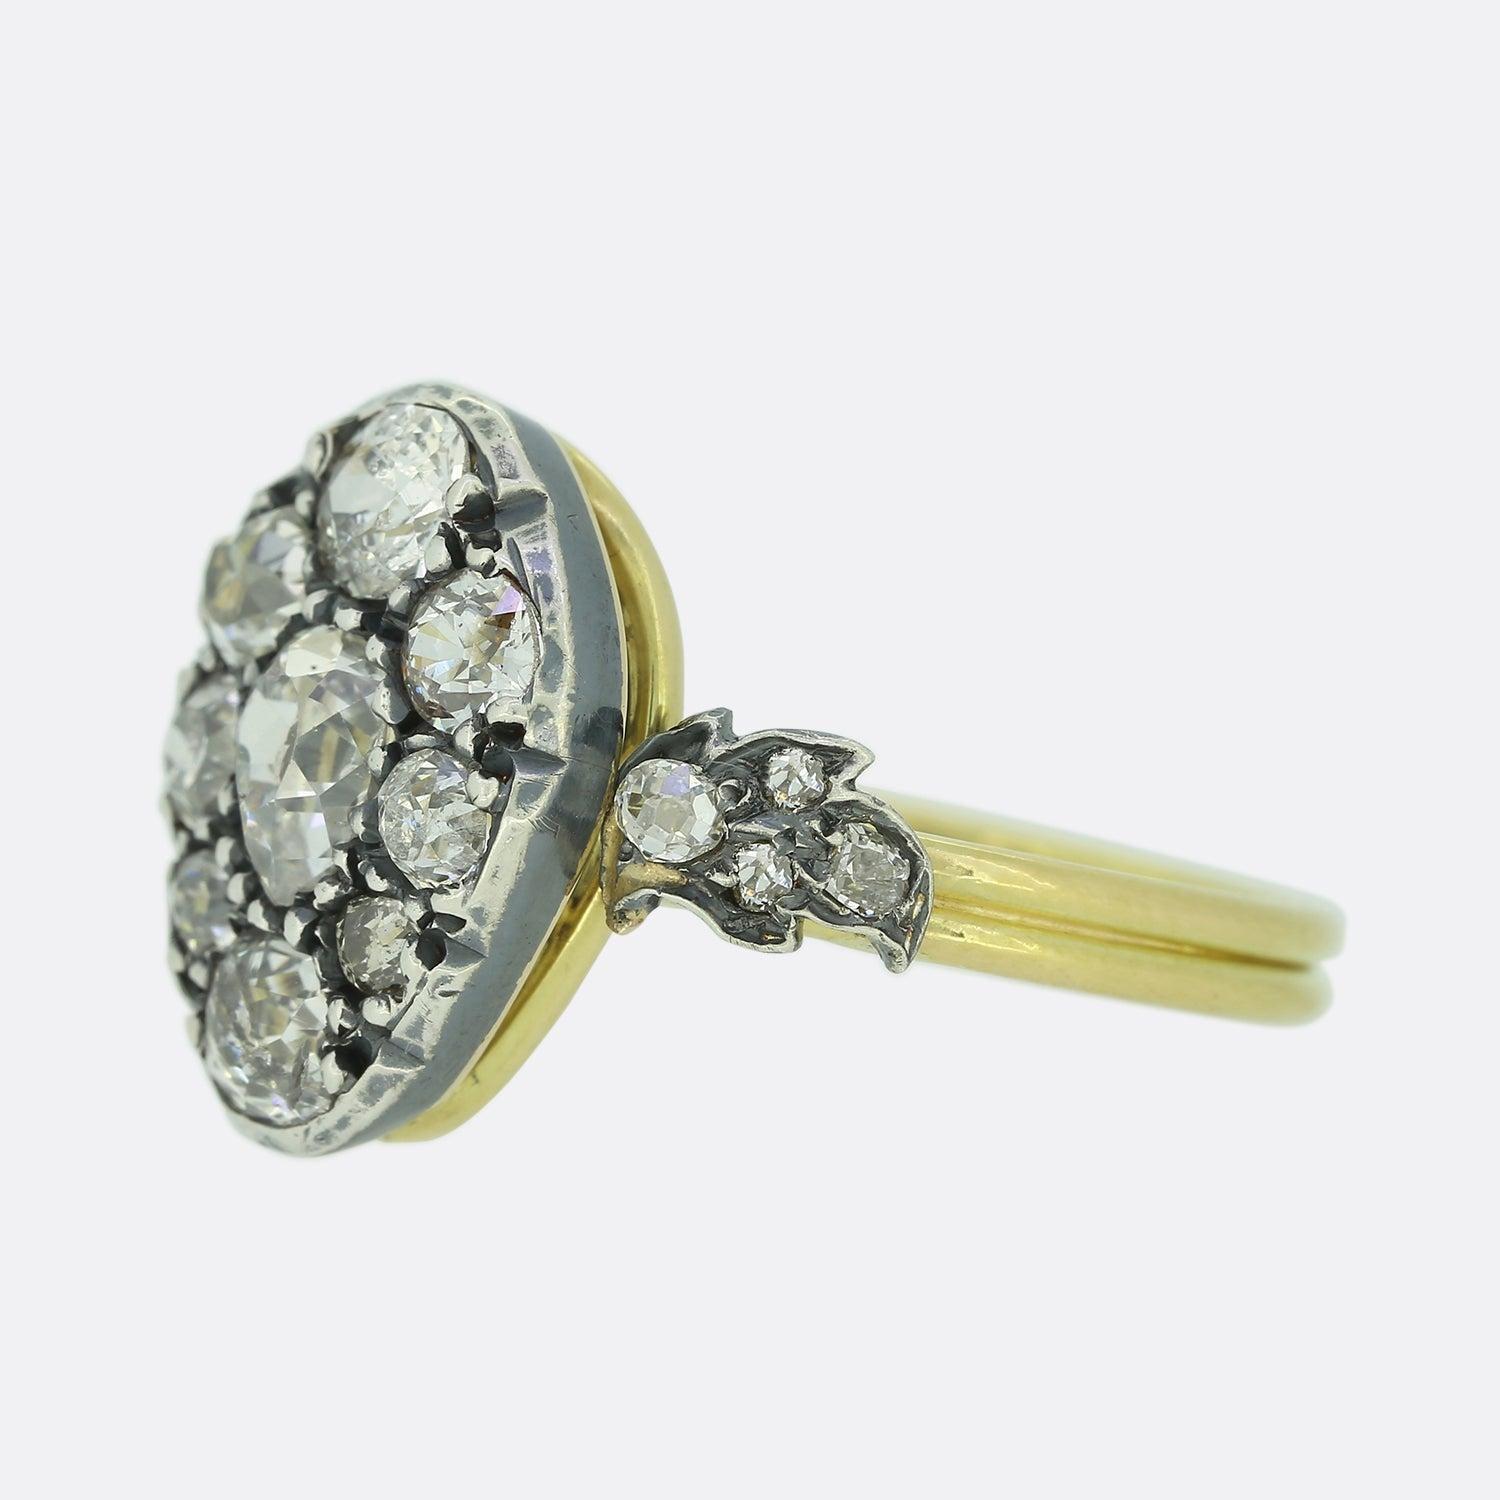 This is a beautiful, 18ct yellow gold diamond cluster ring. The ring features a central old cut pear shaped diamond and is surrounded by eight smaller old cut diamonds that vary in shape and size. The diamonds are silver set in cut down collet